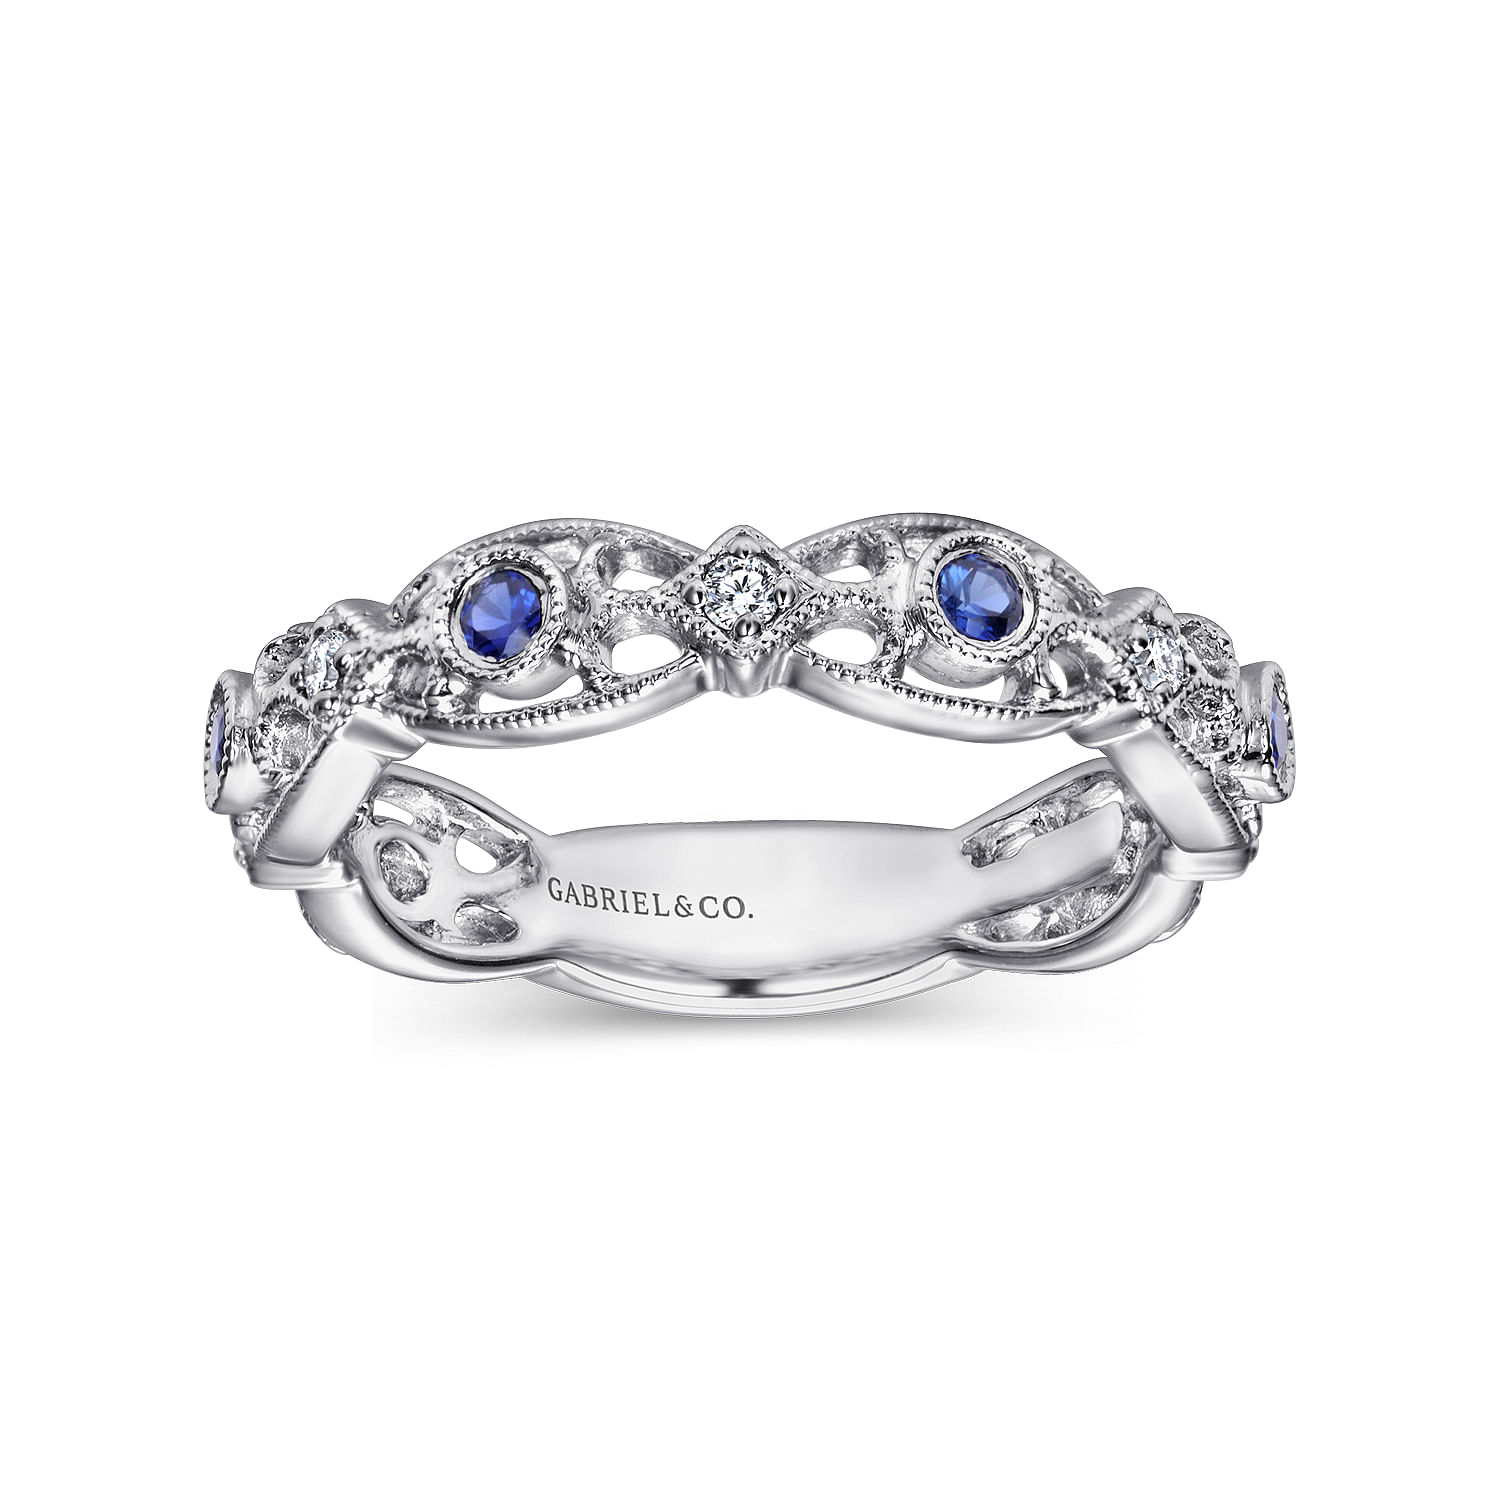 14K White Gold Filigree Band with Sapphire and Diamond Stations